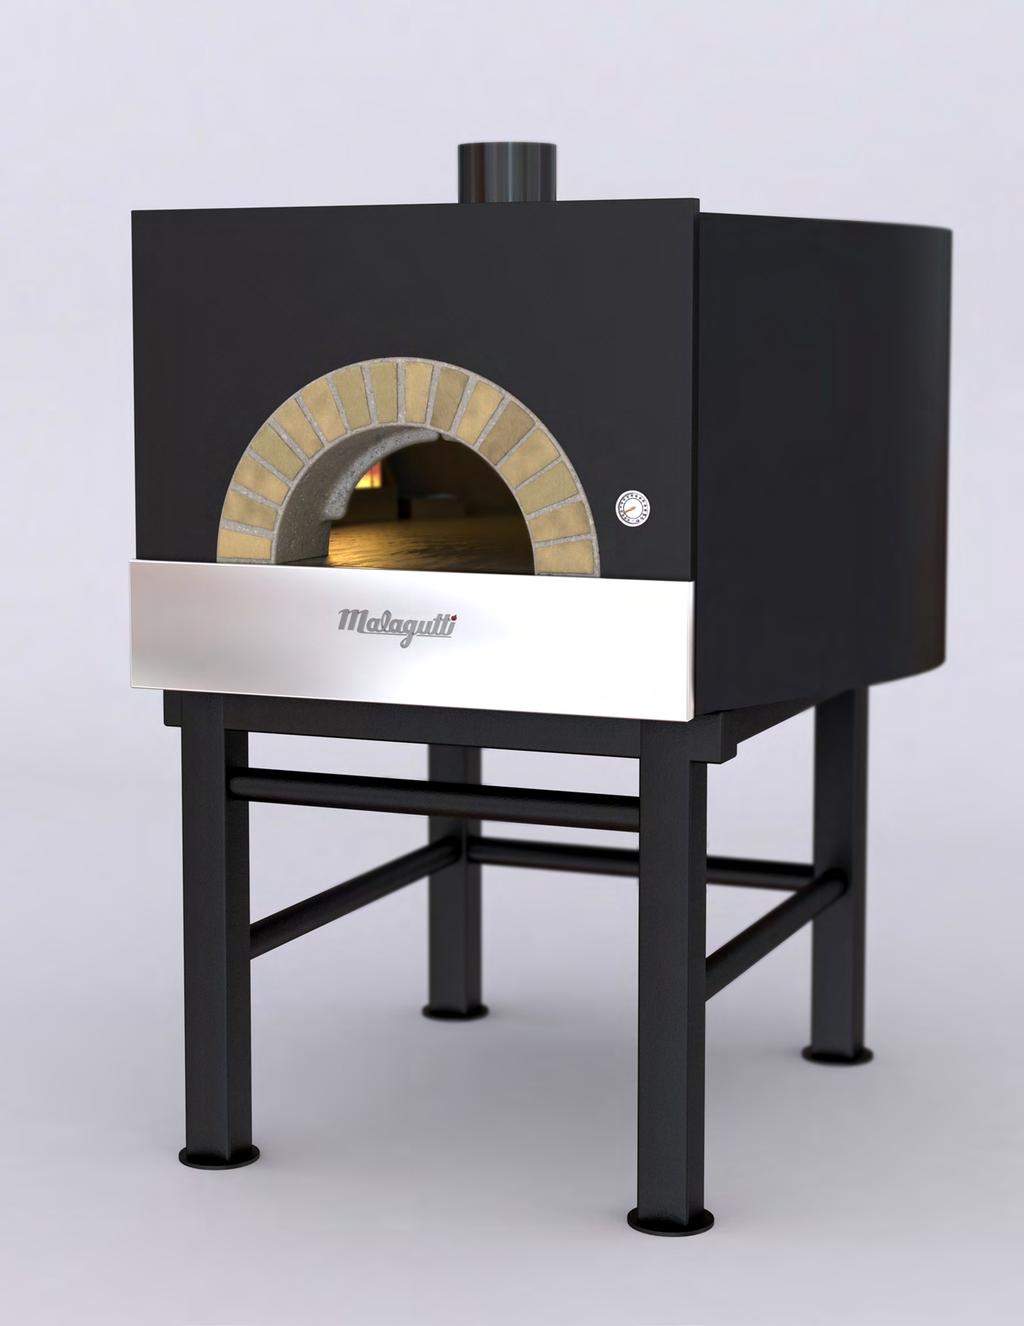 MILANO With the option of either being used free standing or built into an enclosure, the Milano is our most flexible oven.